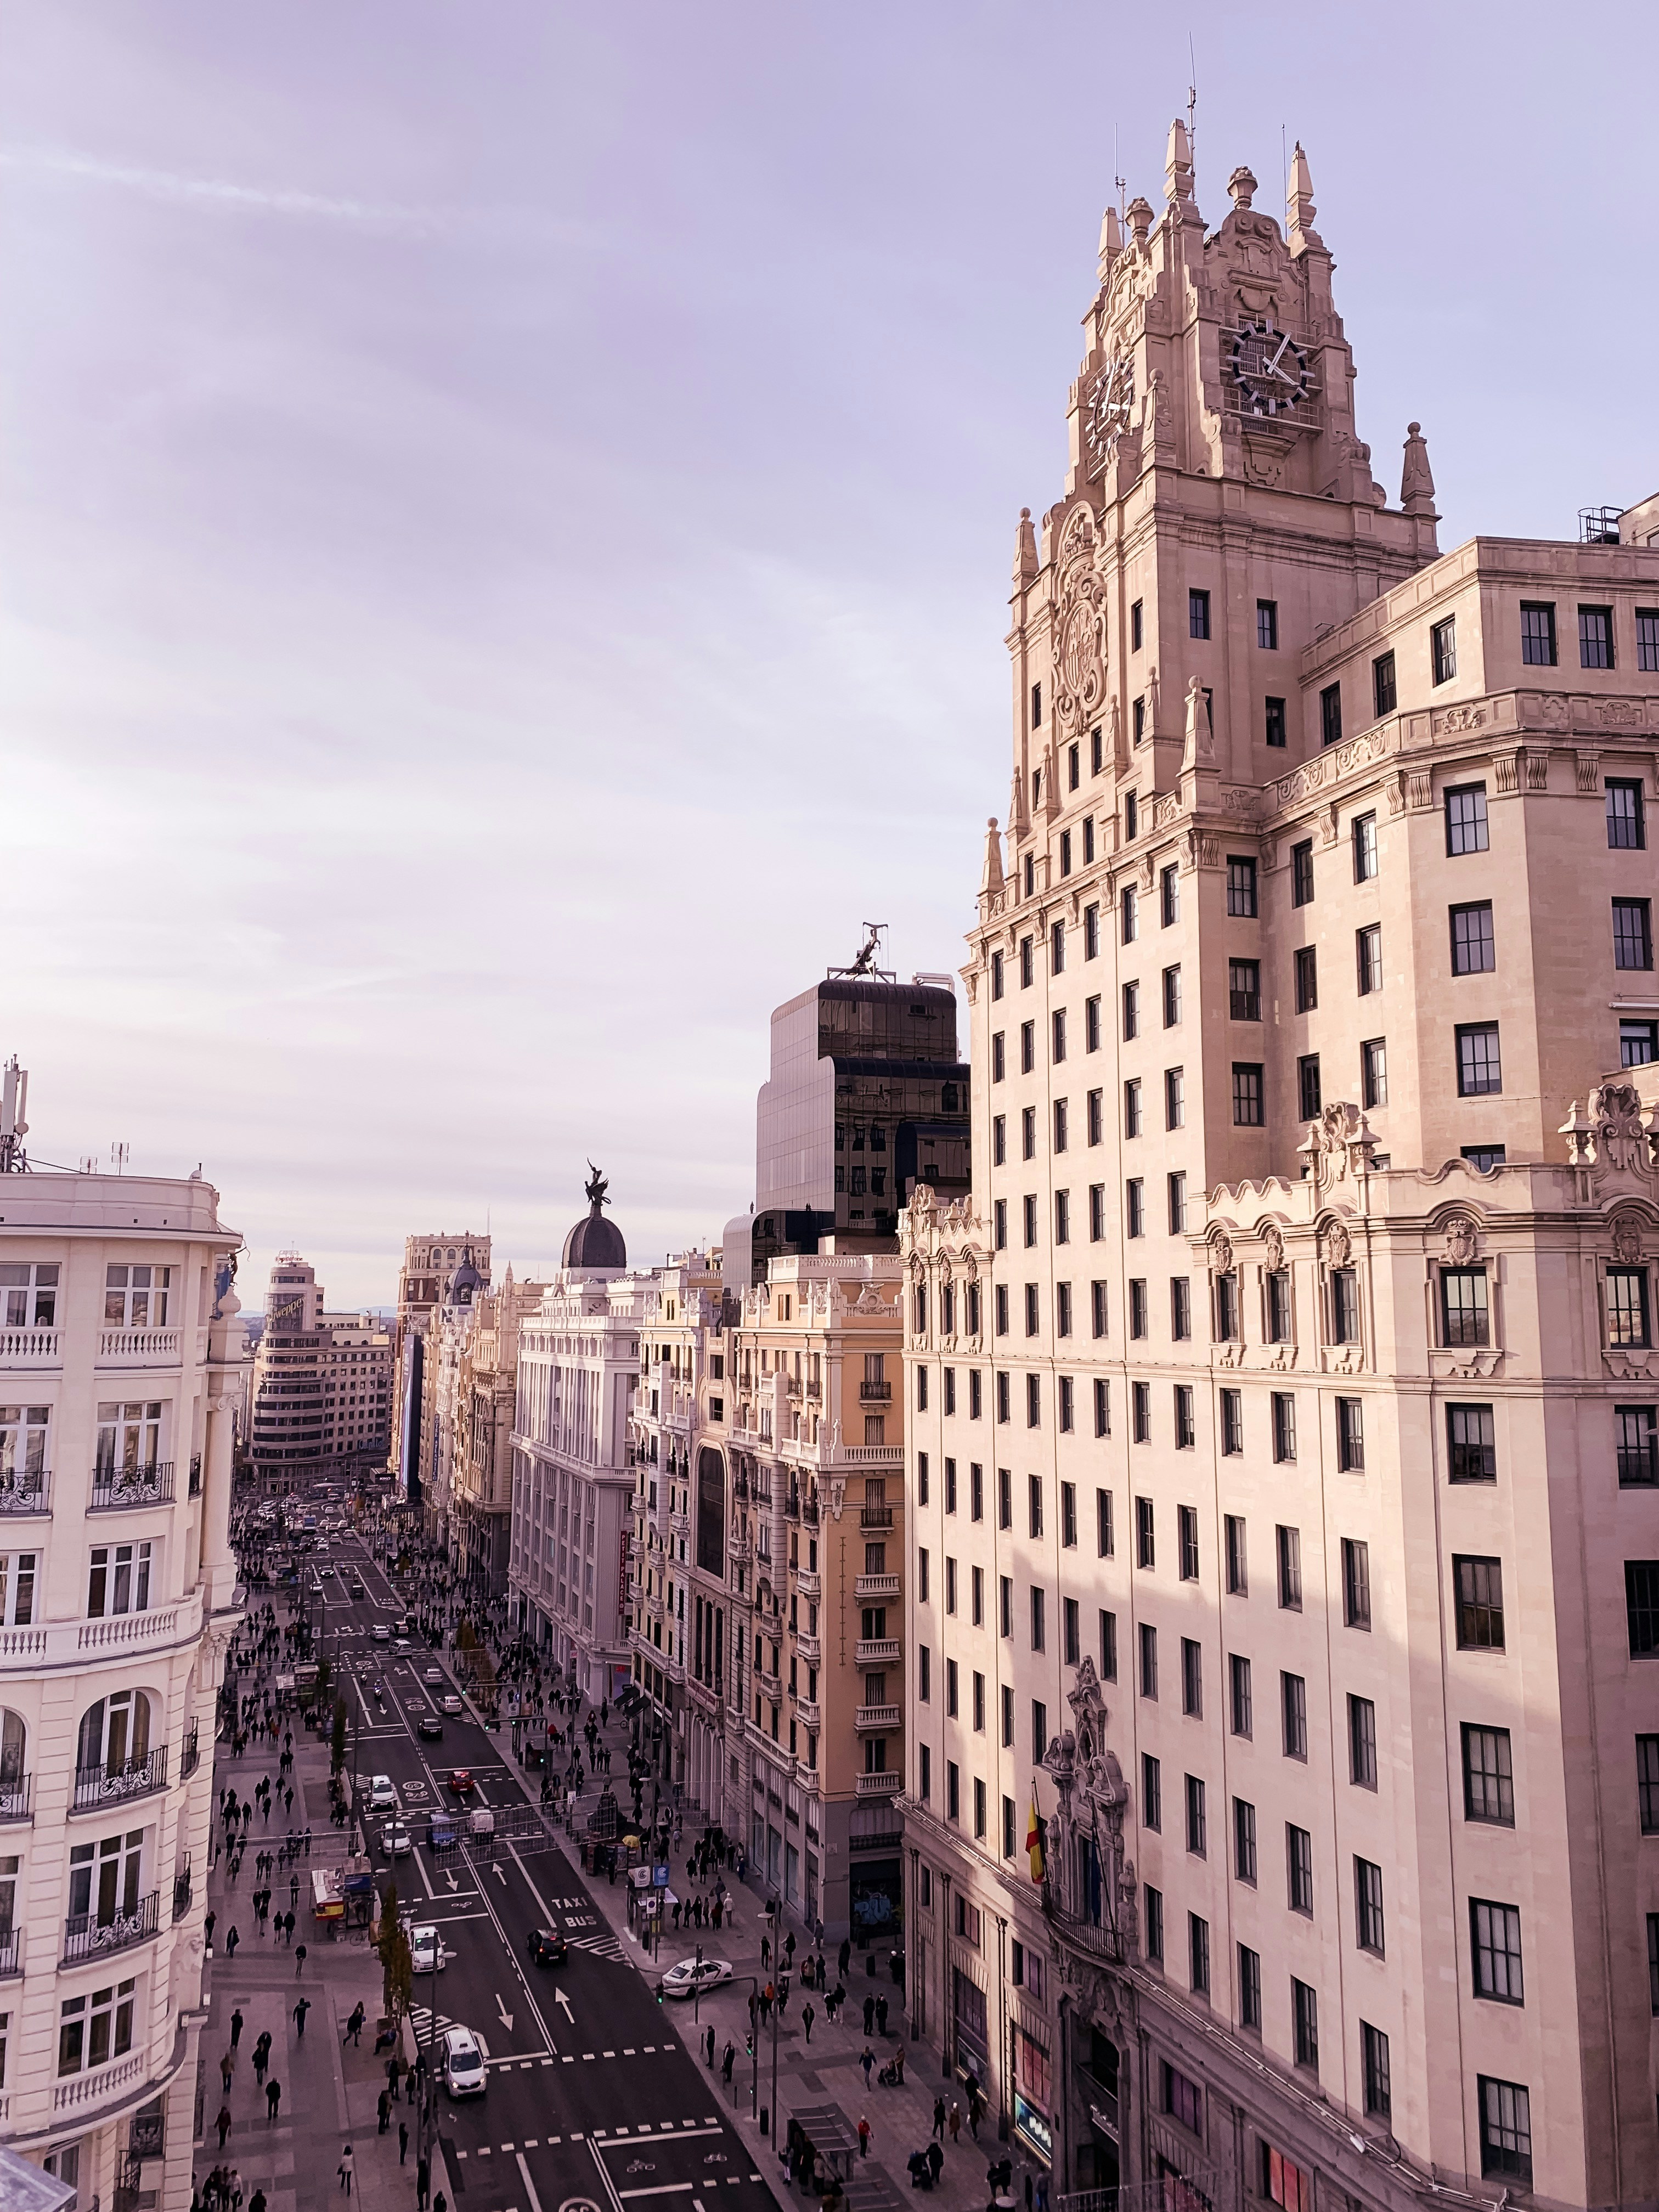 Sunset in Madrid, Gran Via seen from above.